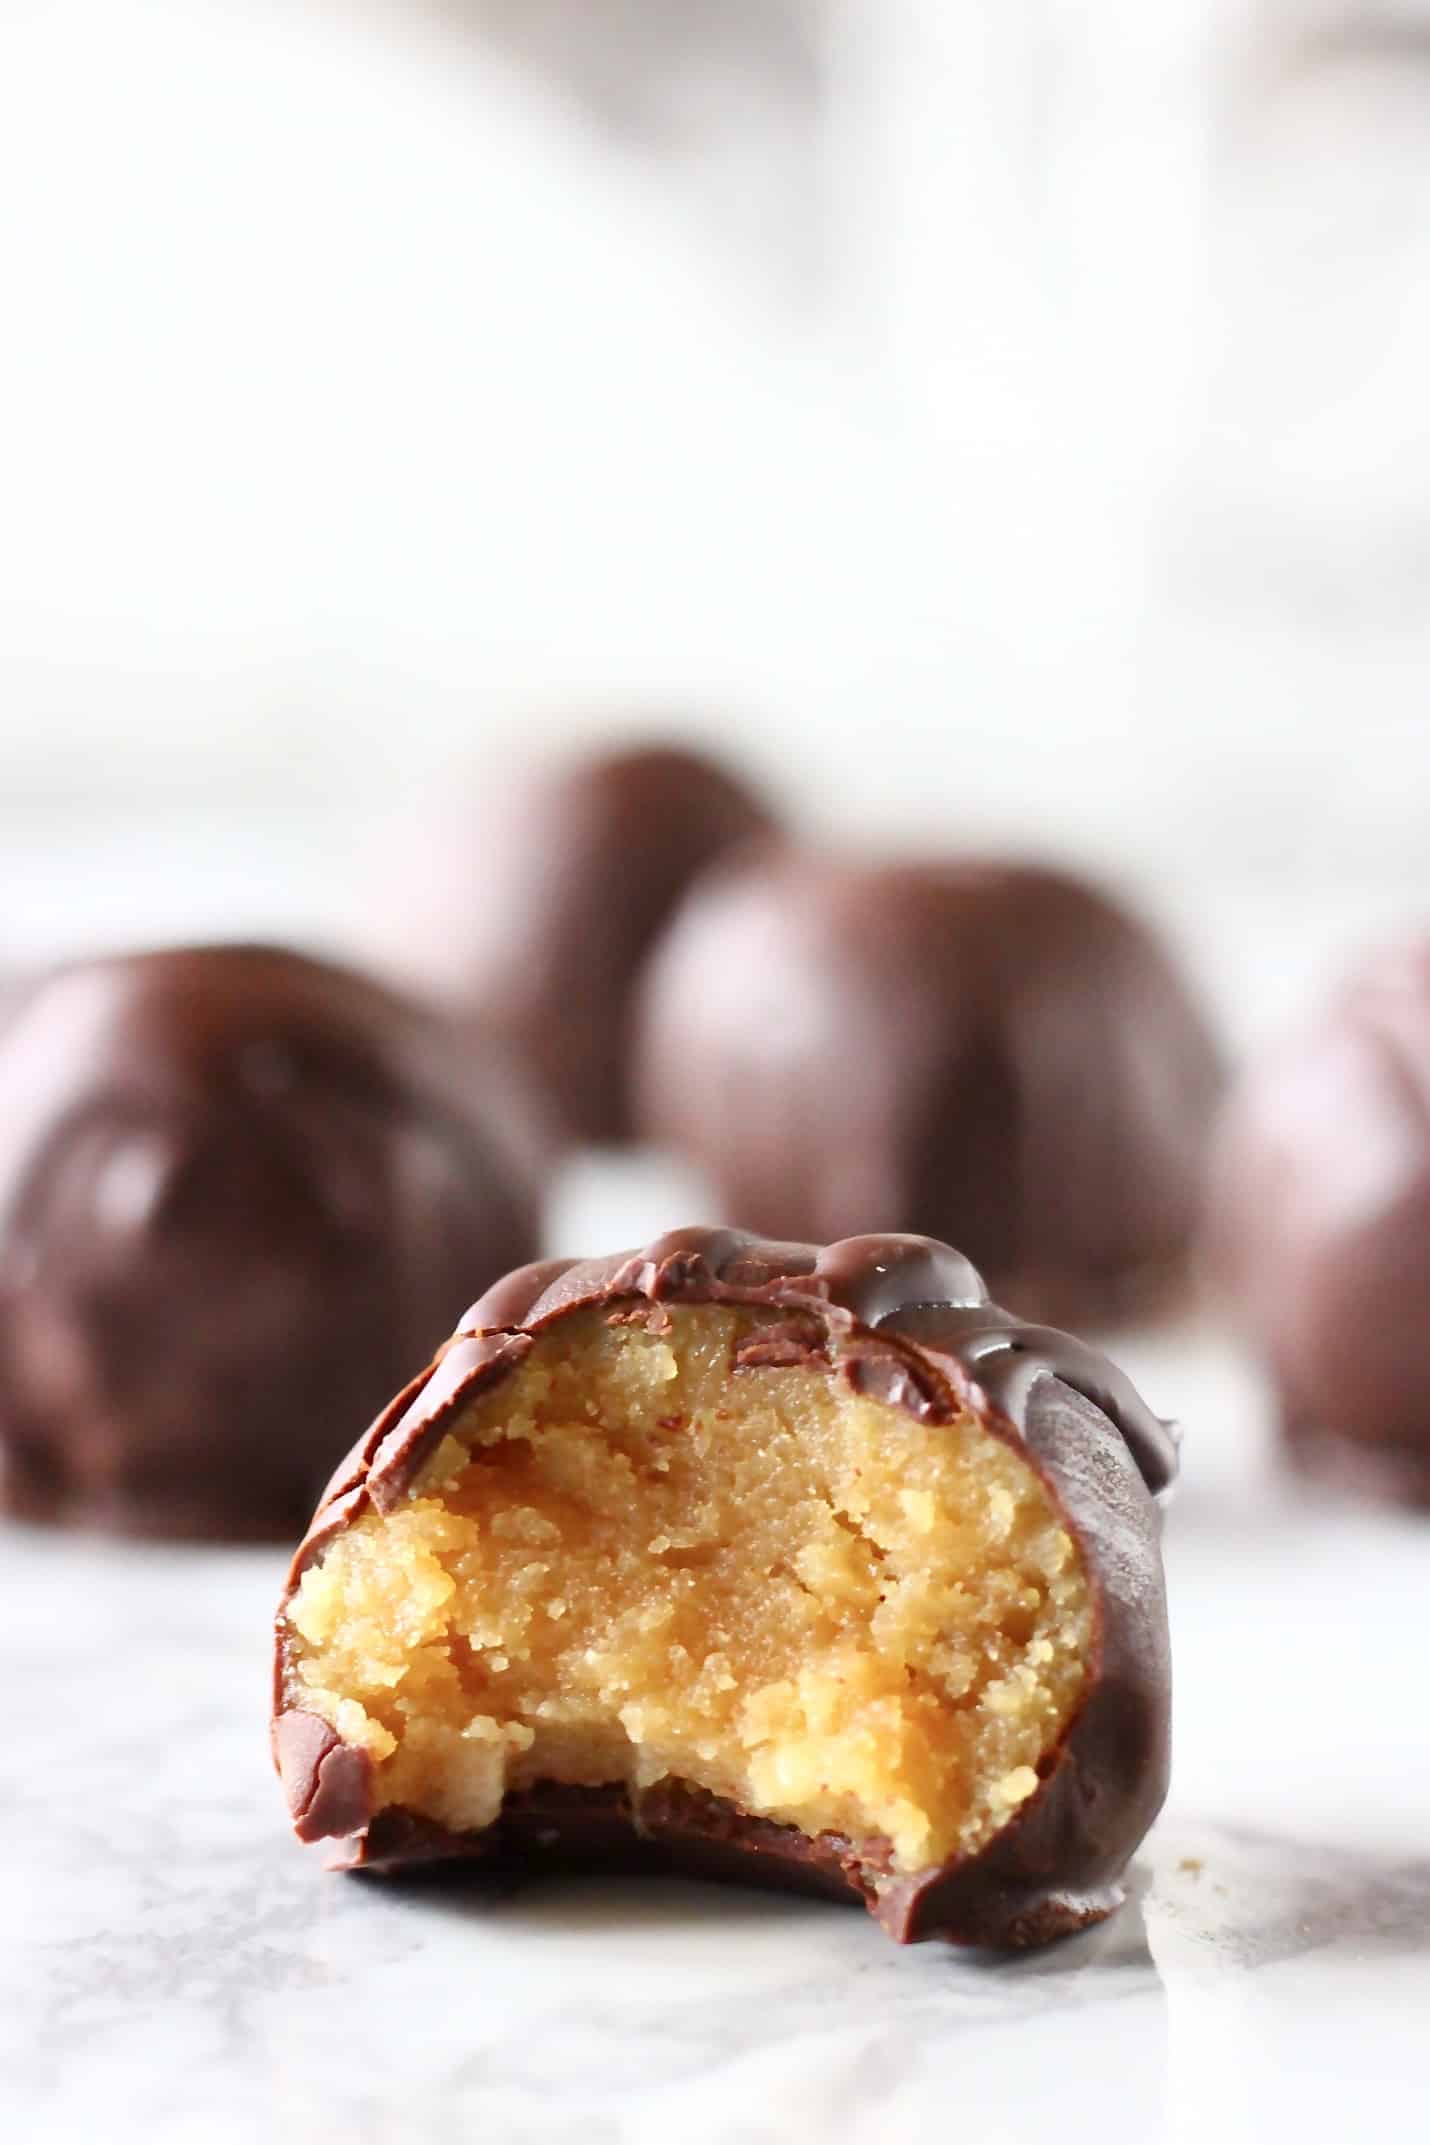 Chocolate-covered healthy peanut butter balls with a bite taken out of one